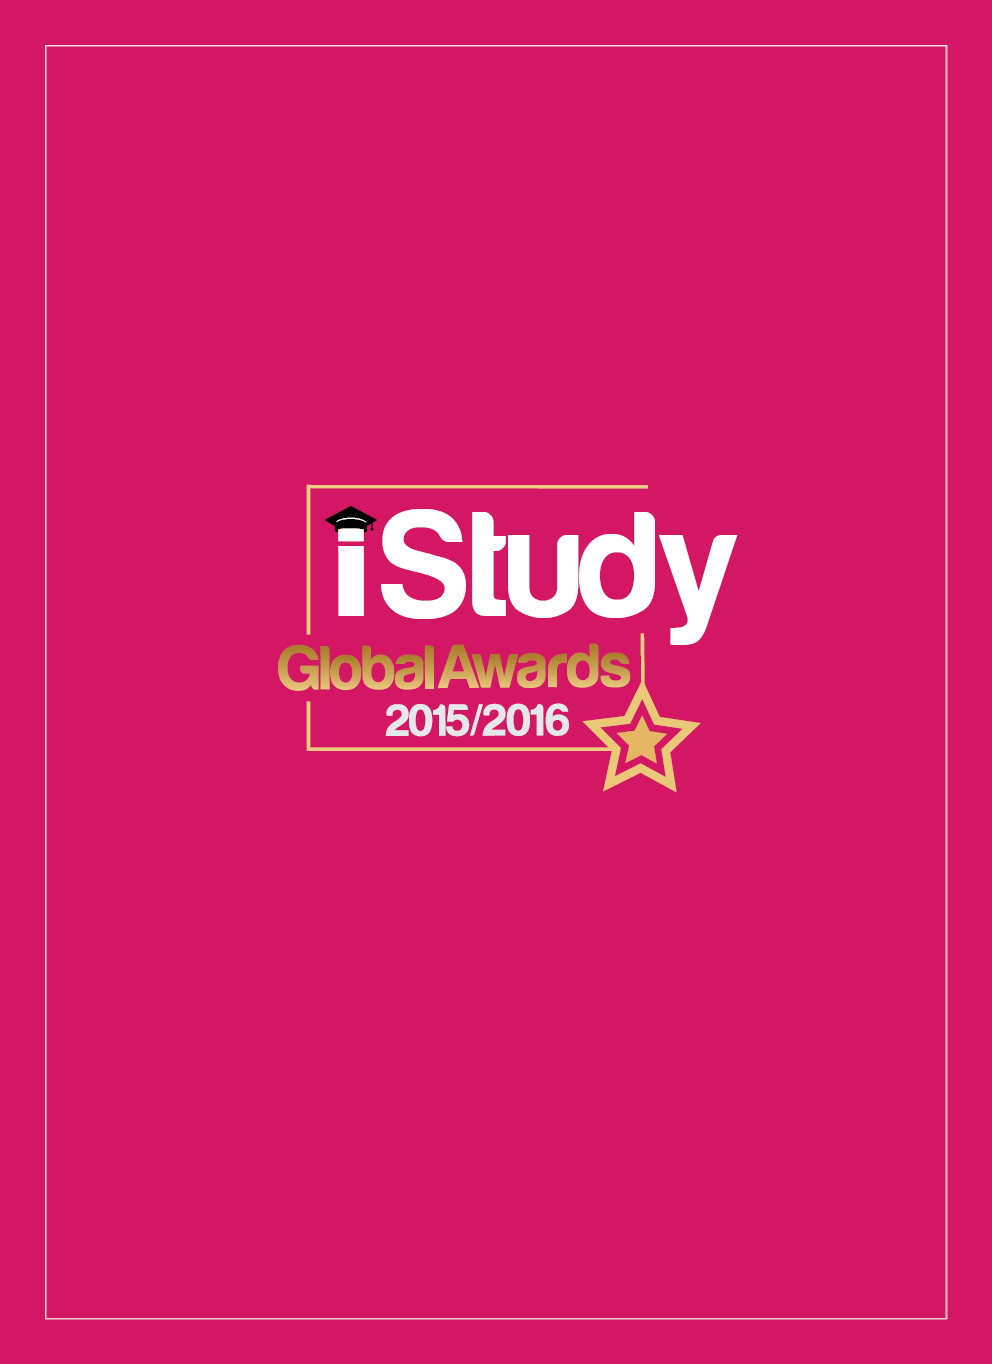 iStudy Global Awards 2015/2016 - Cover Image